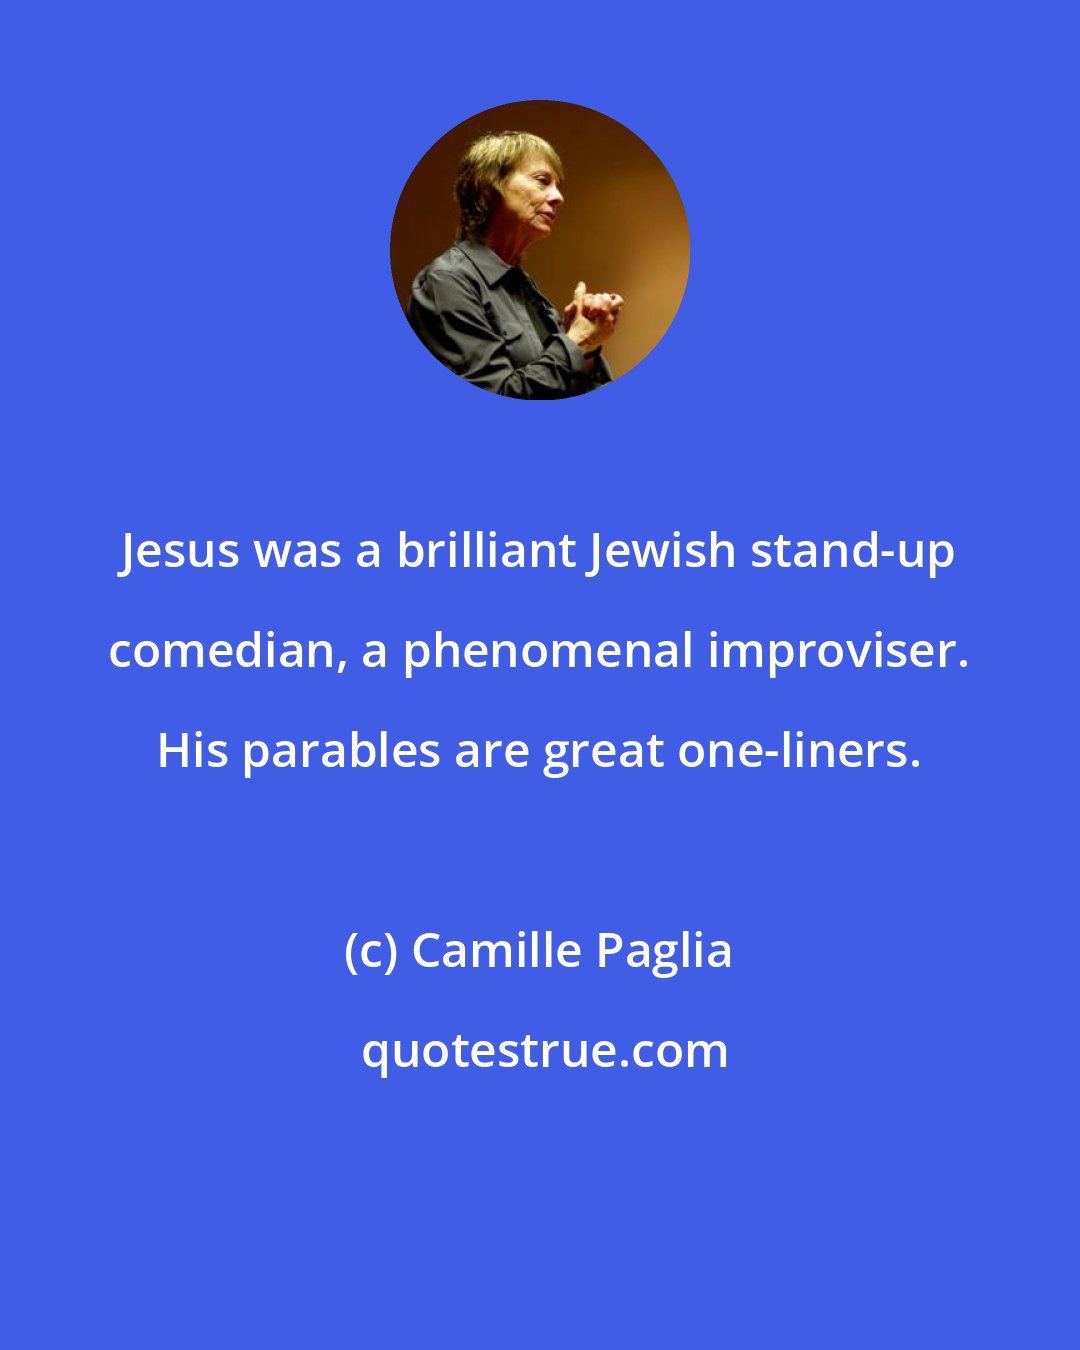 Camille Paglia: Jesus was a brilliant Jewish stand-up comedian, a phenomenal improviser. His parables are great one-liners.